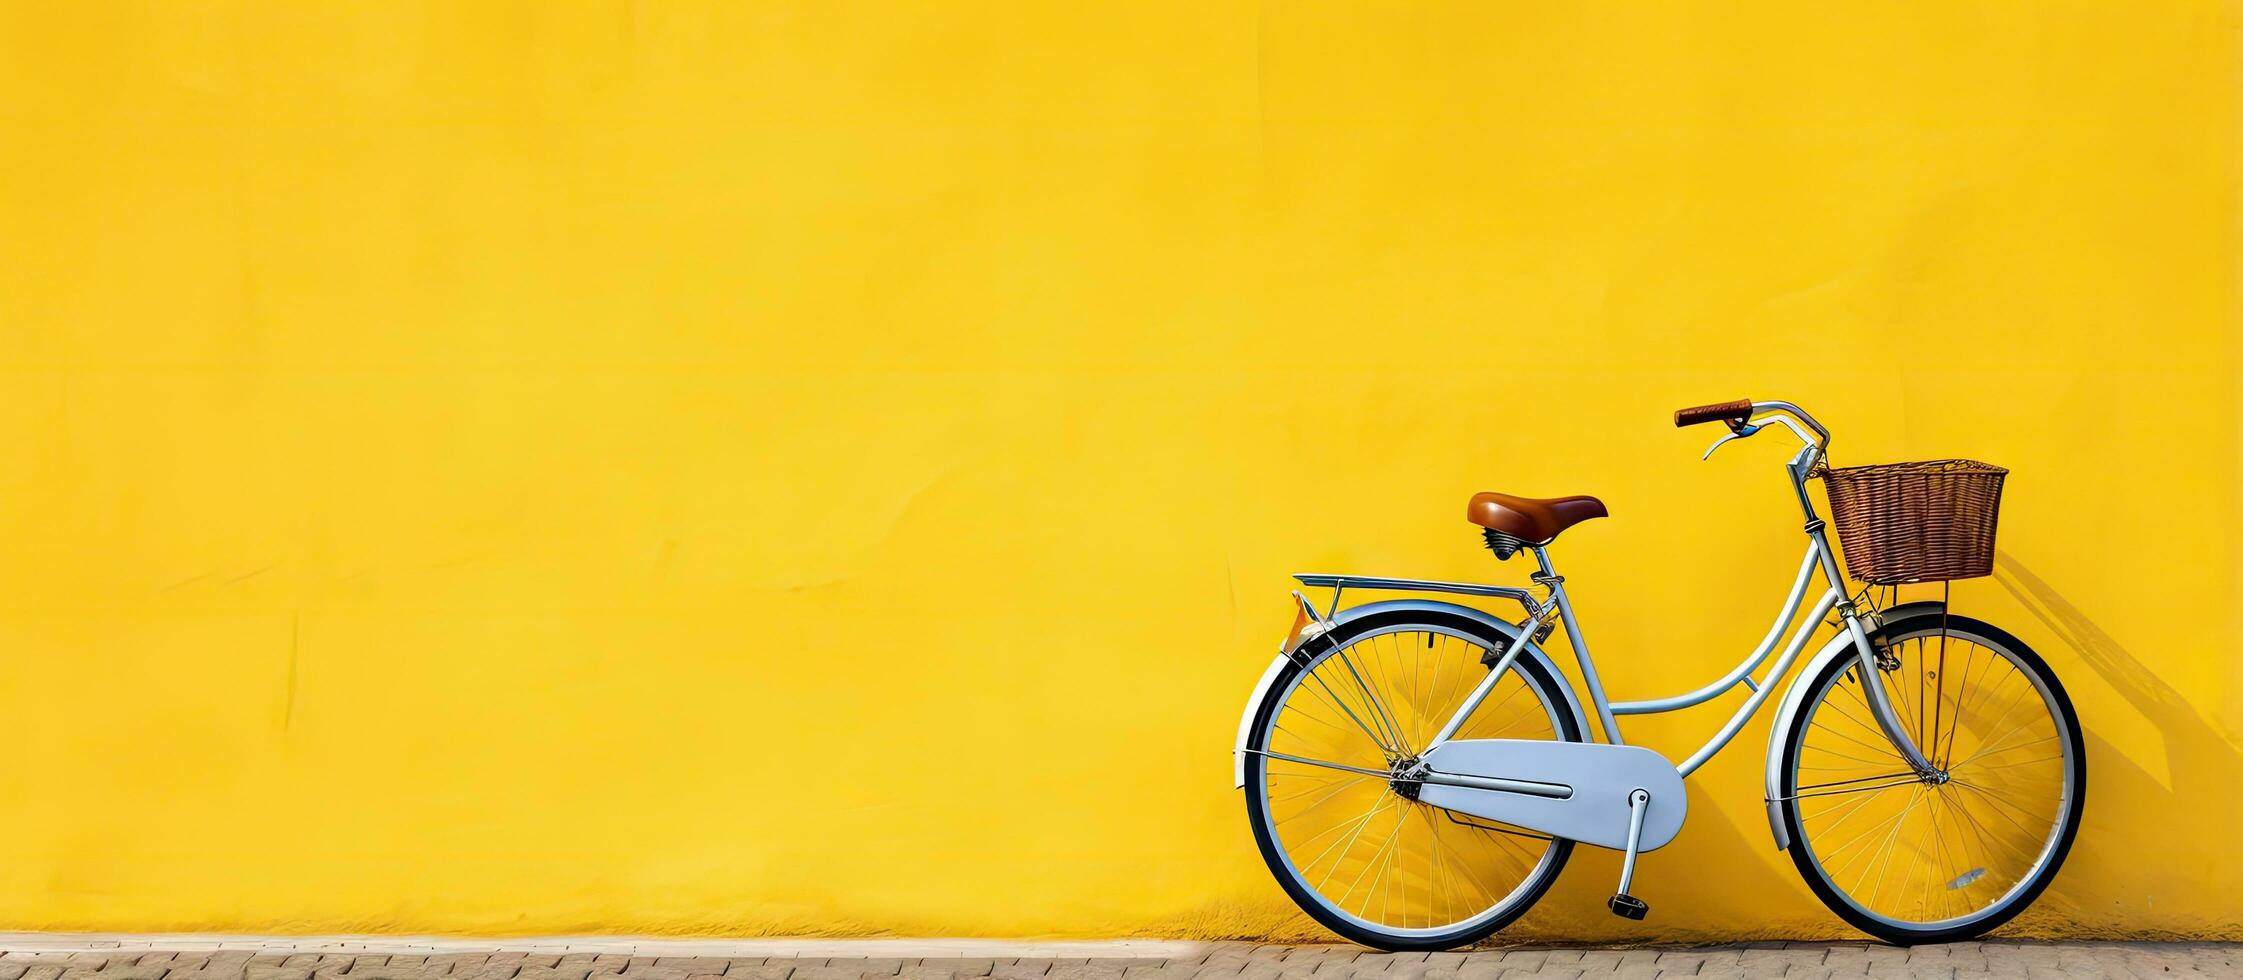 Fashionable bike next to a wall of yellow and white color photo